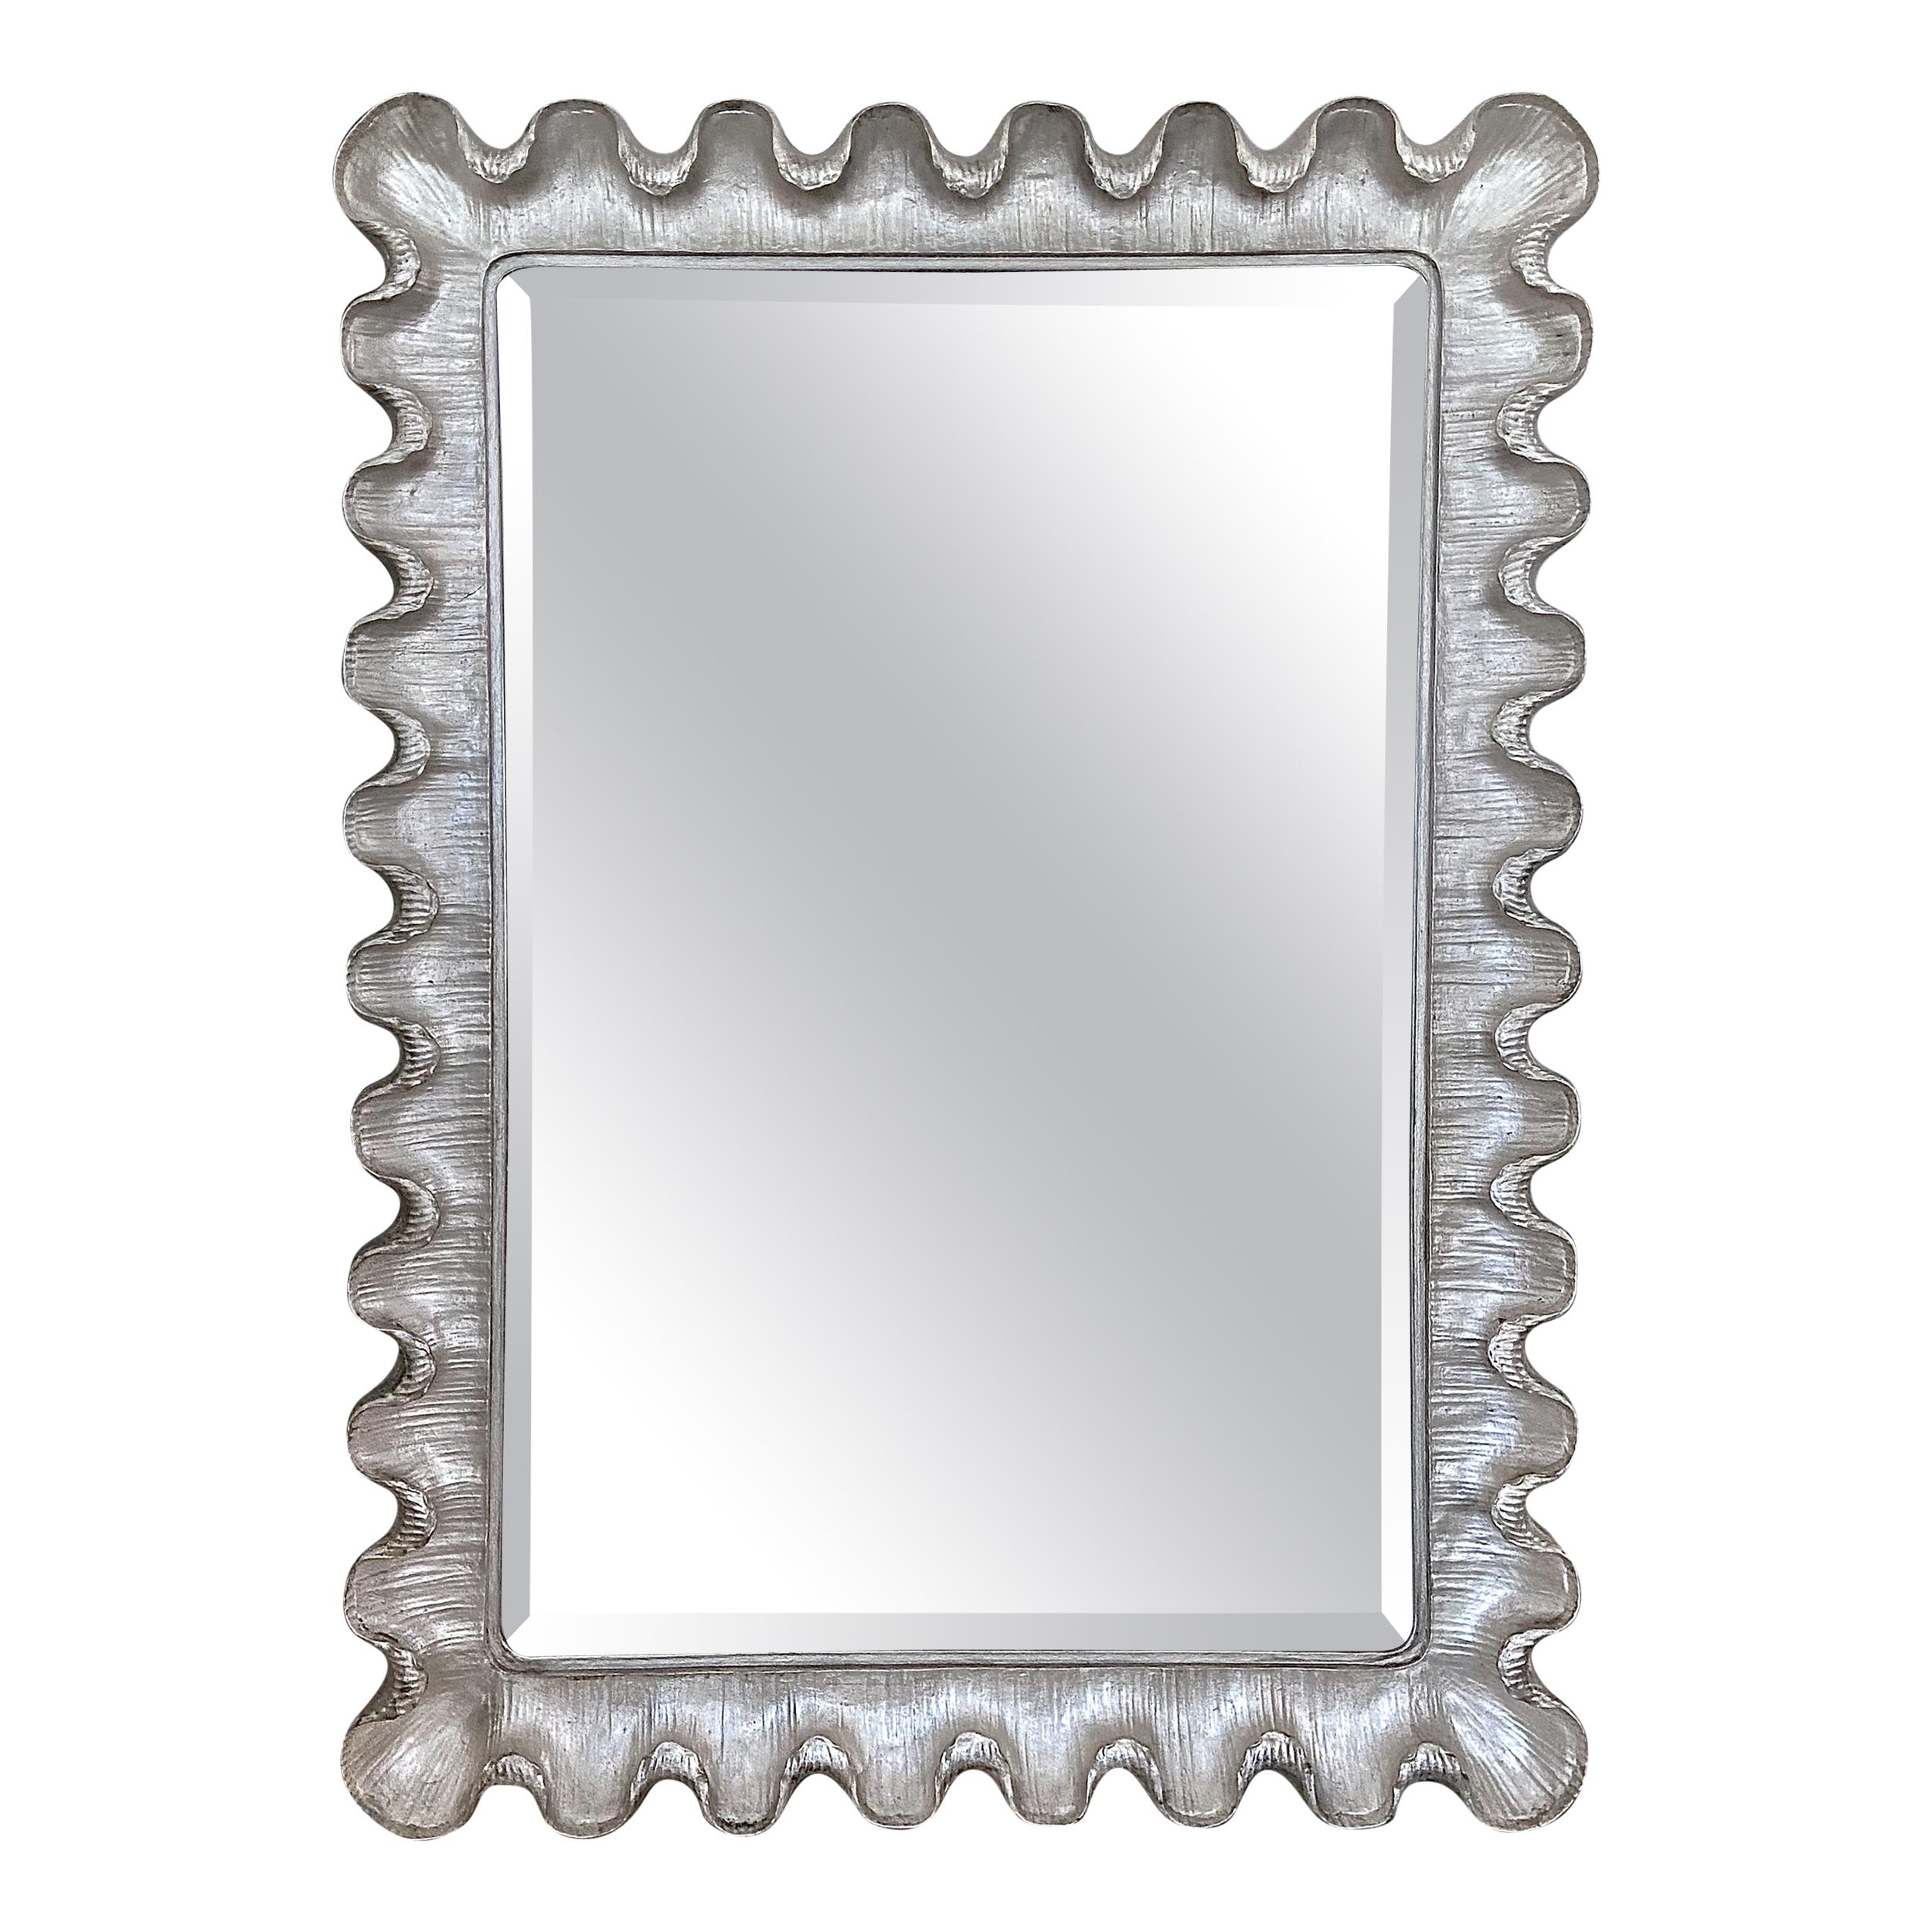 Silver Giltwood Scalloped Edge Moderne Style Wall Mirror